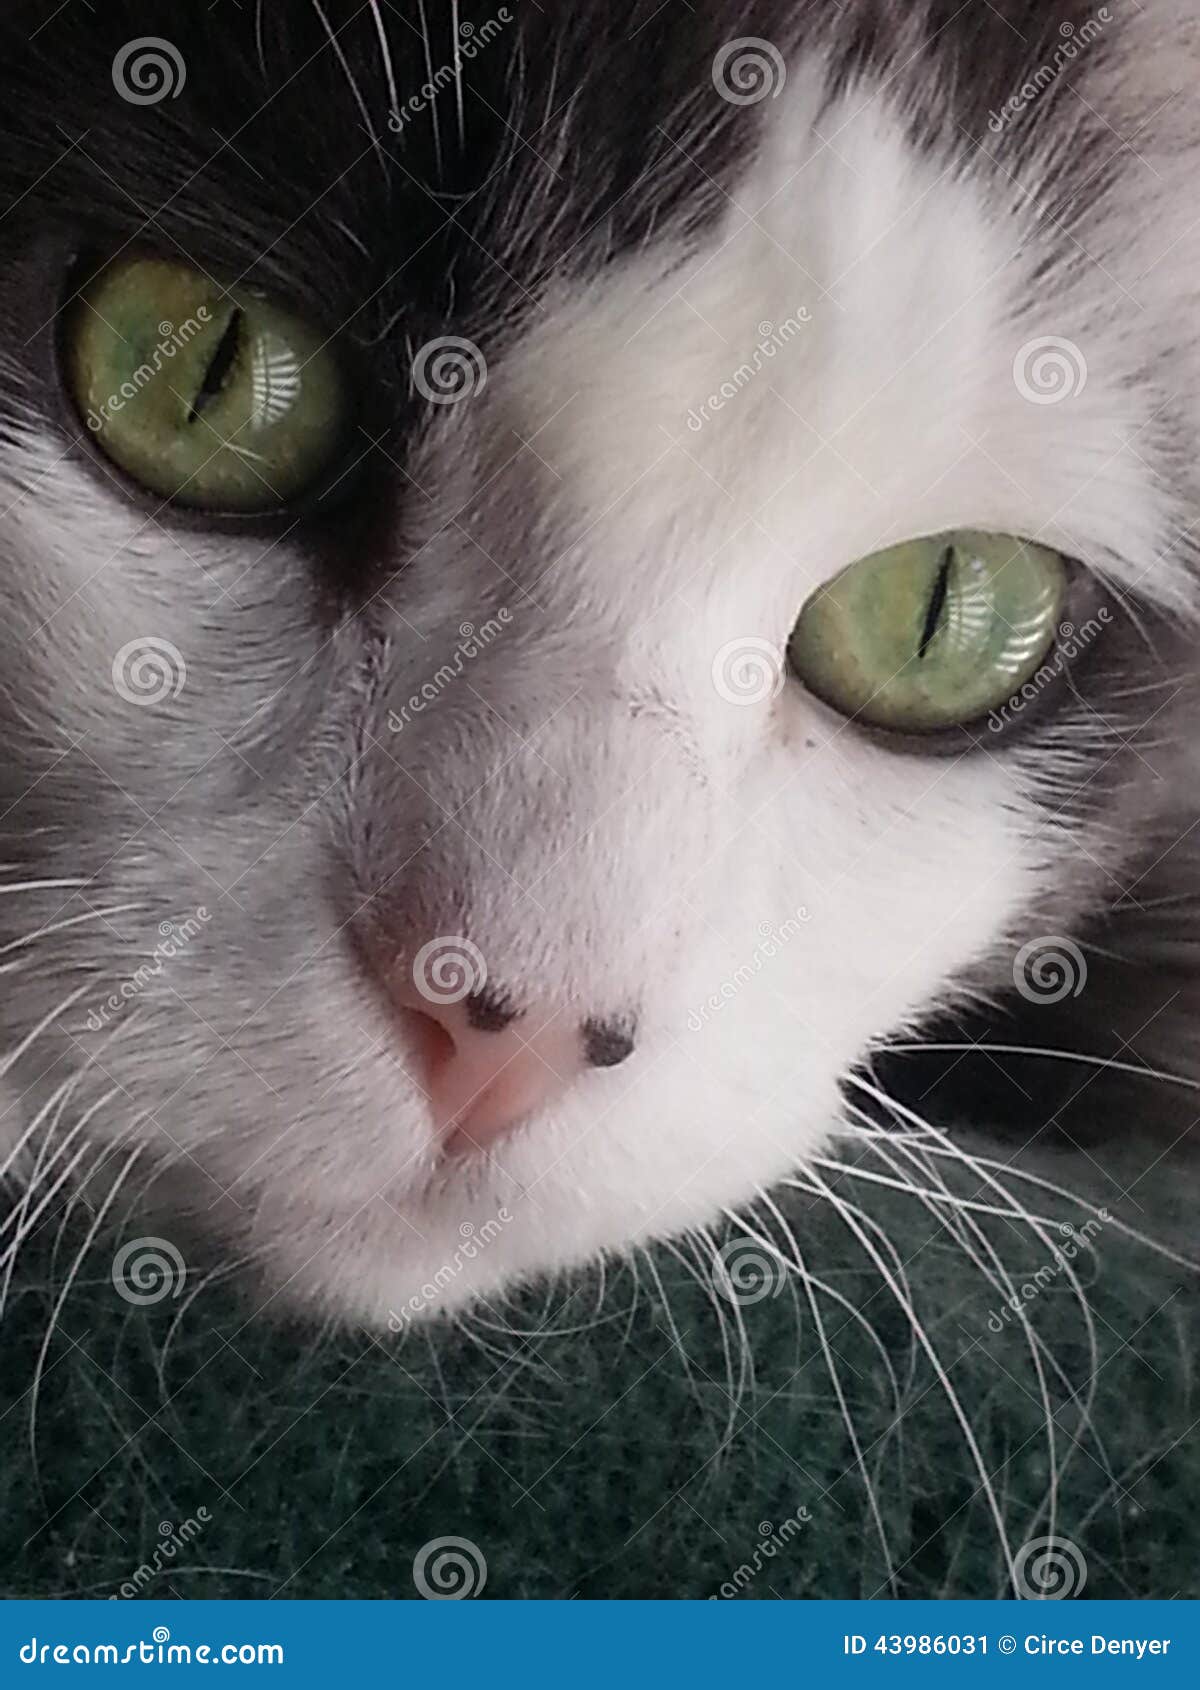 black and white spotted cat with green eyes